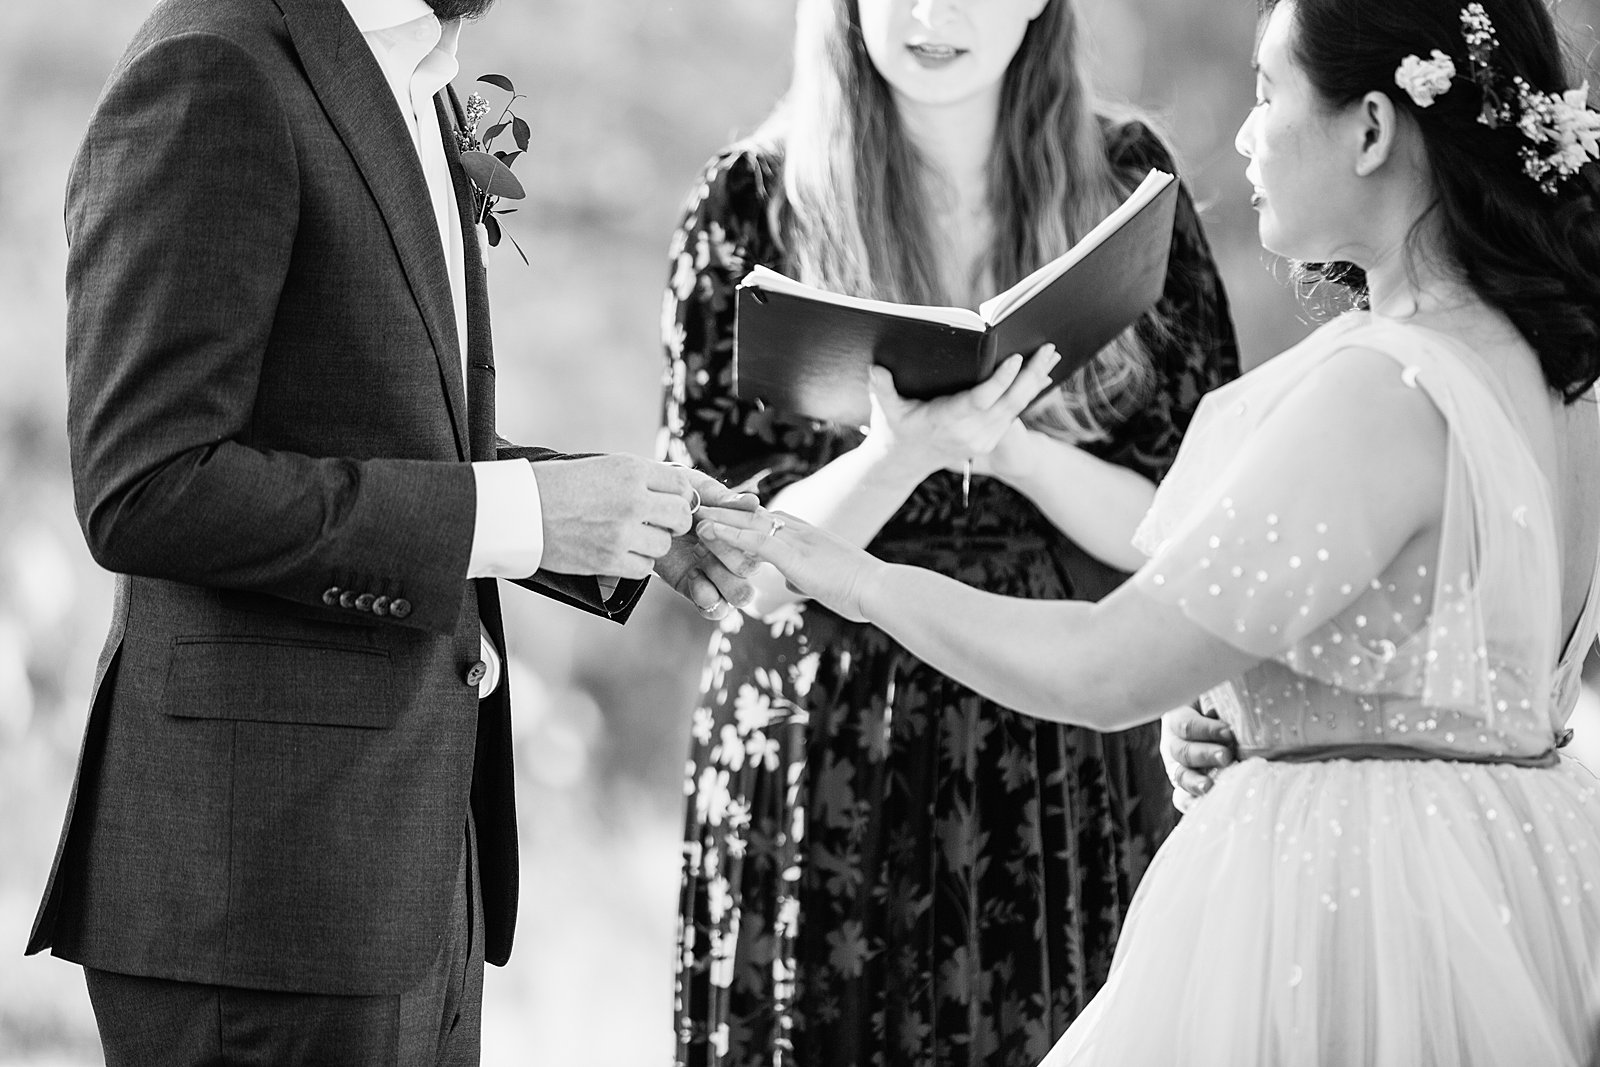 Bride and Groom exchange rings during their wedding ceremony at the Superstition Mountains by Phoenix wedding photographer PMA Photography.